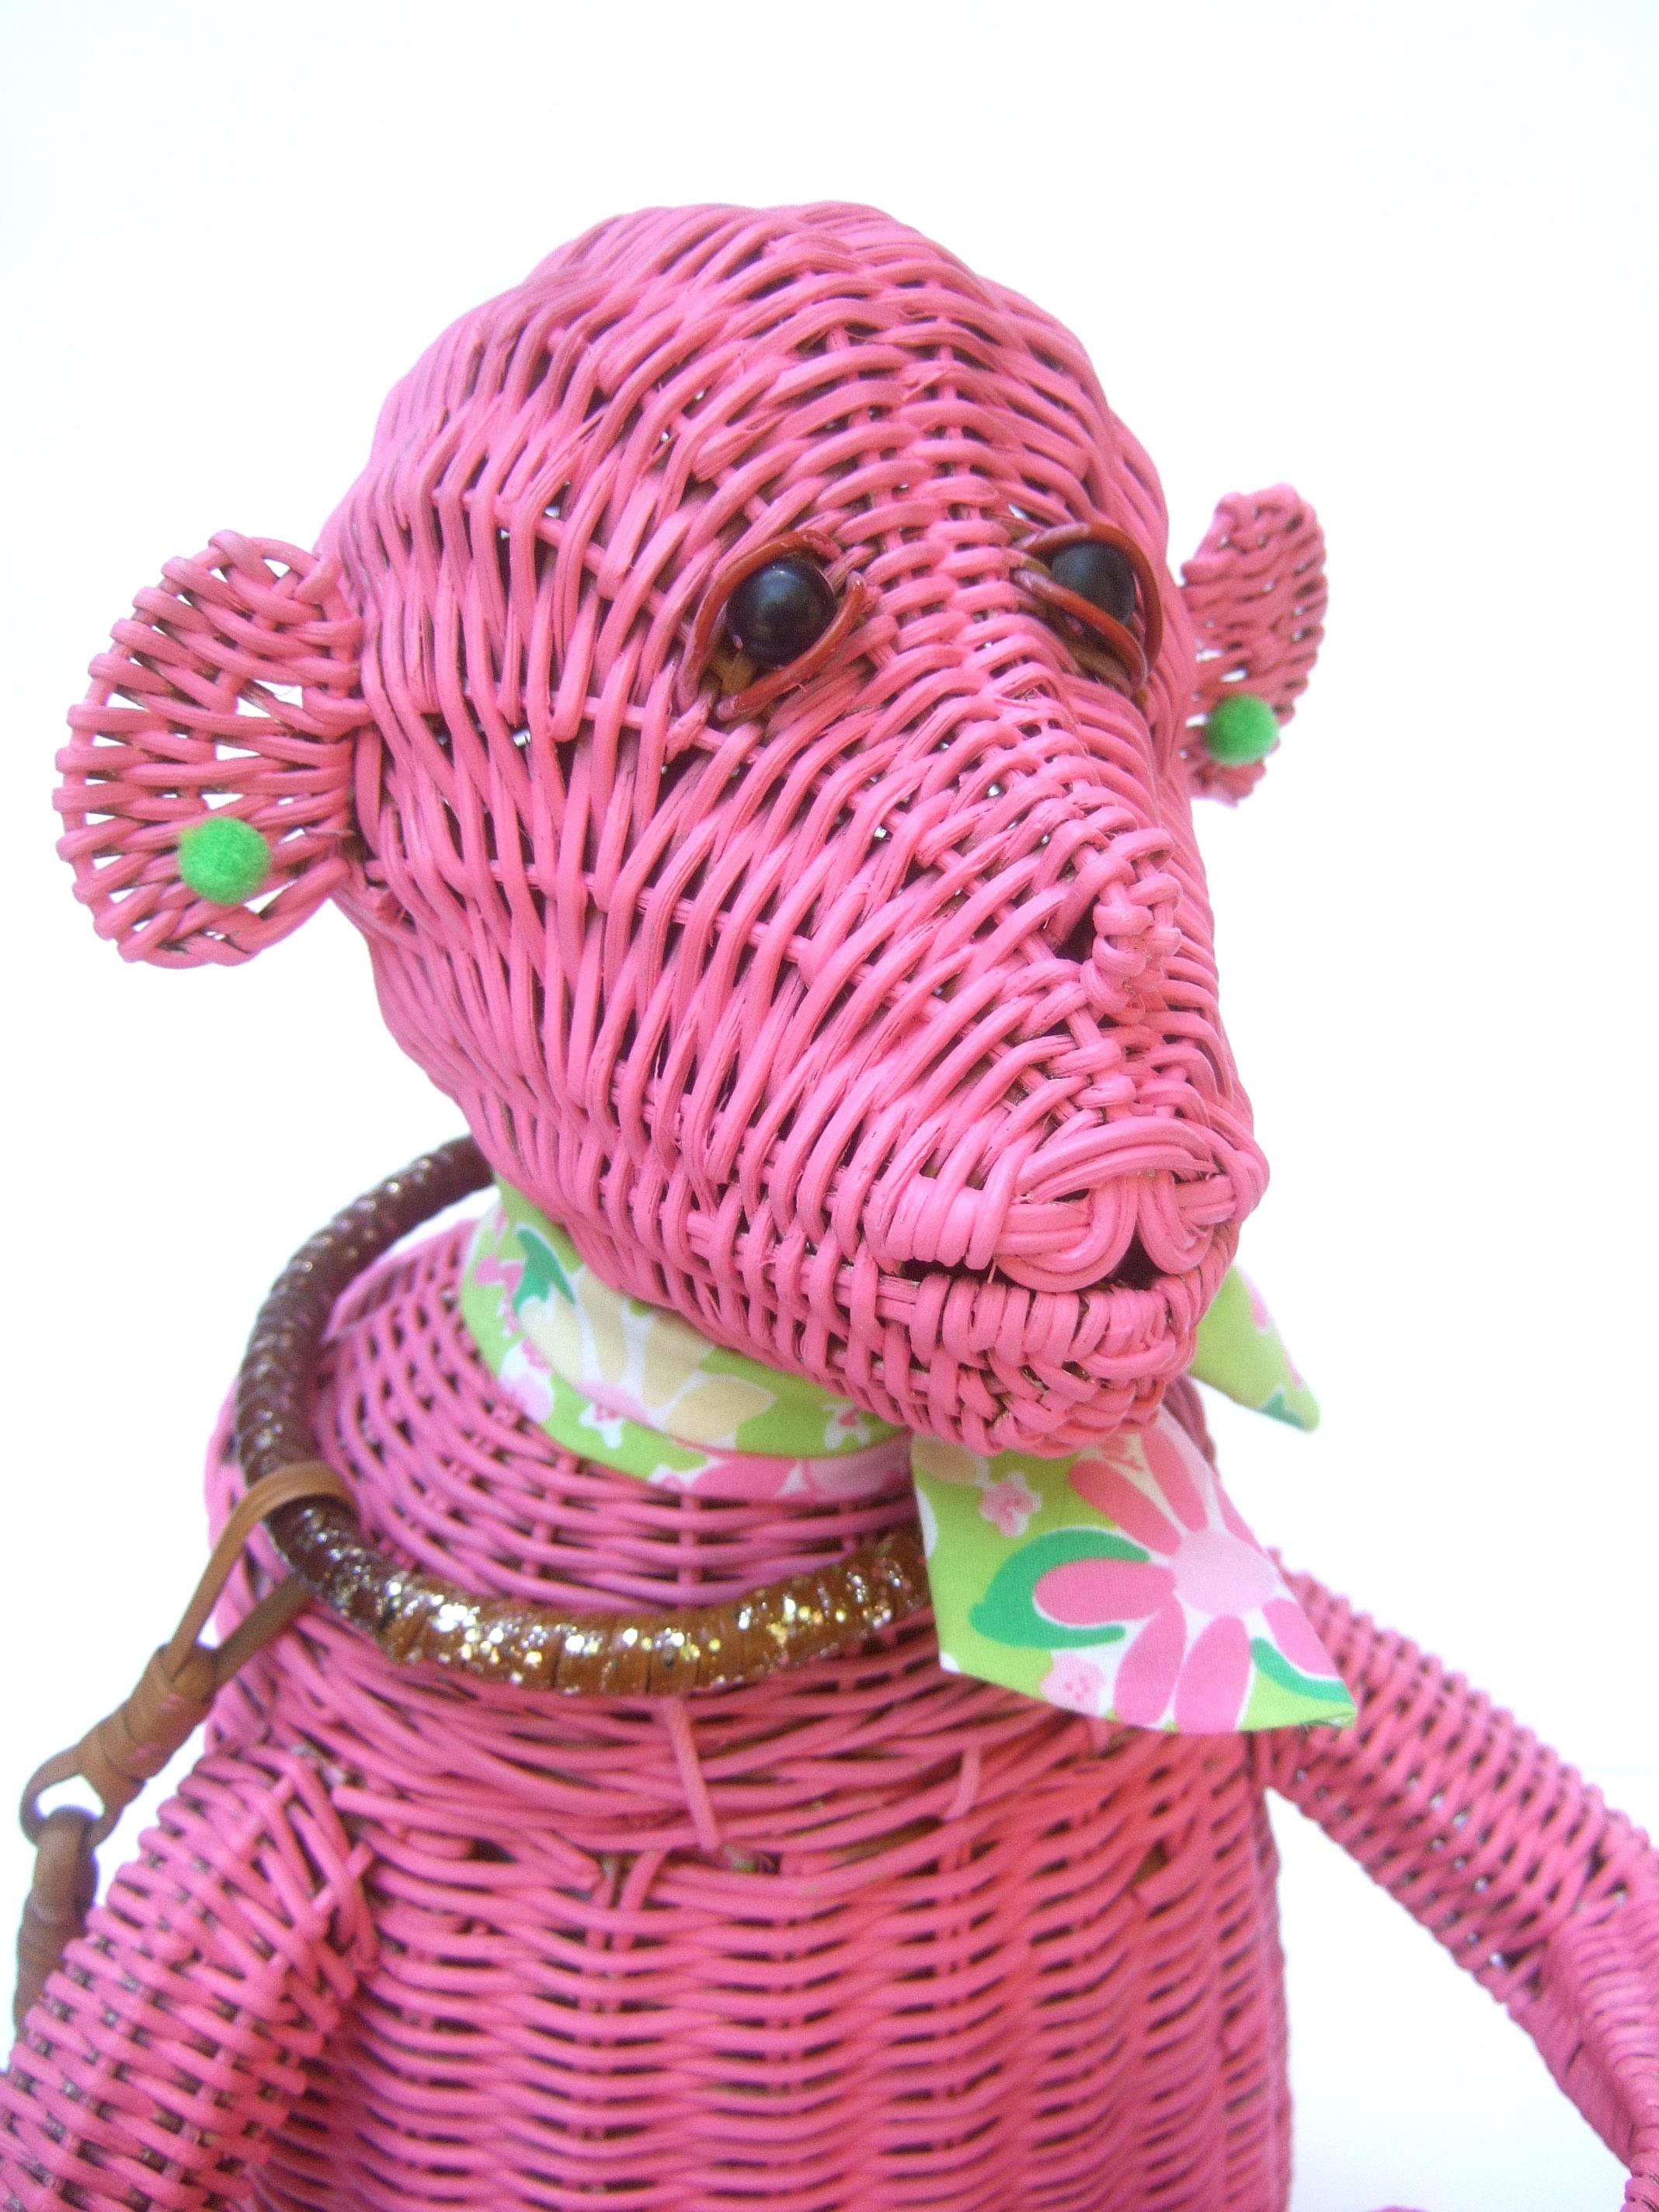 Whimsical Vintage Wicker Monkey Handbag With Lilly Pulitzer Fabric c 1950's  1